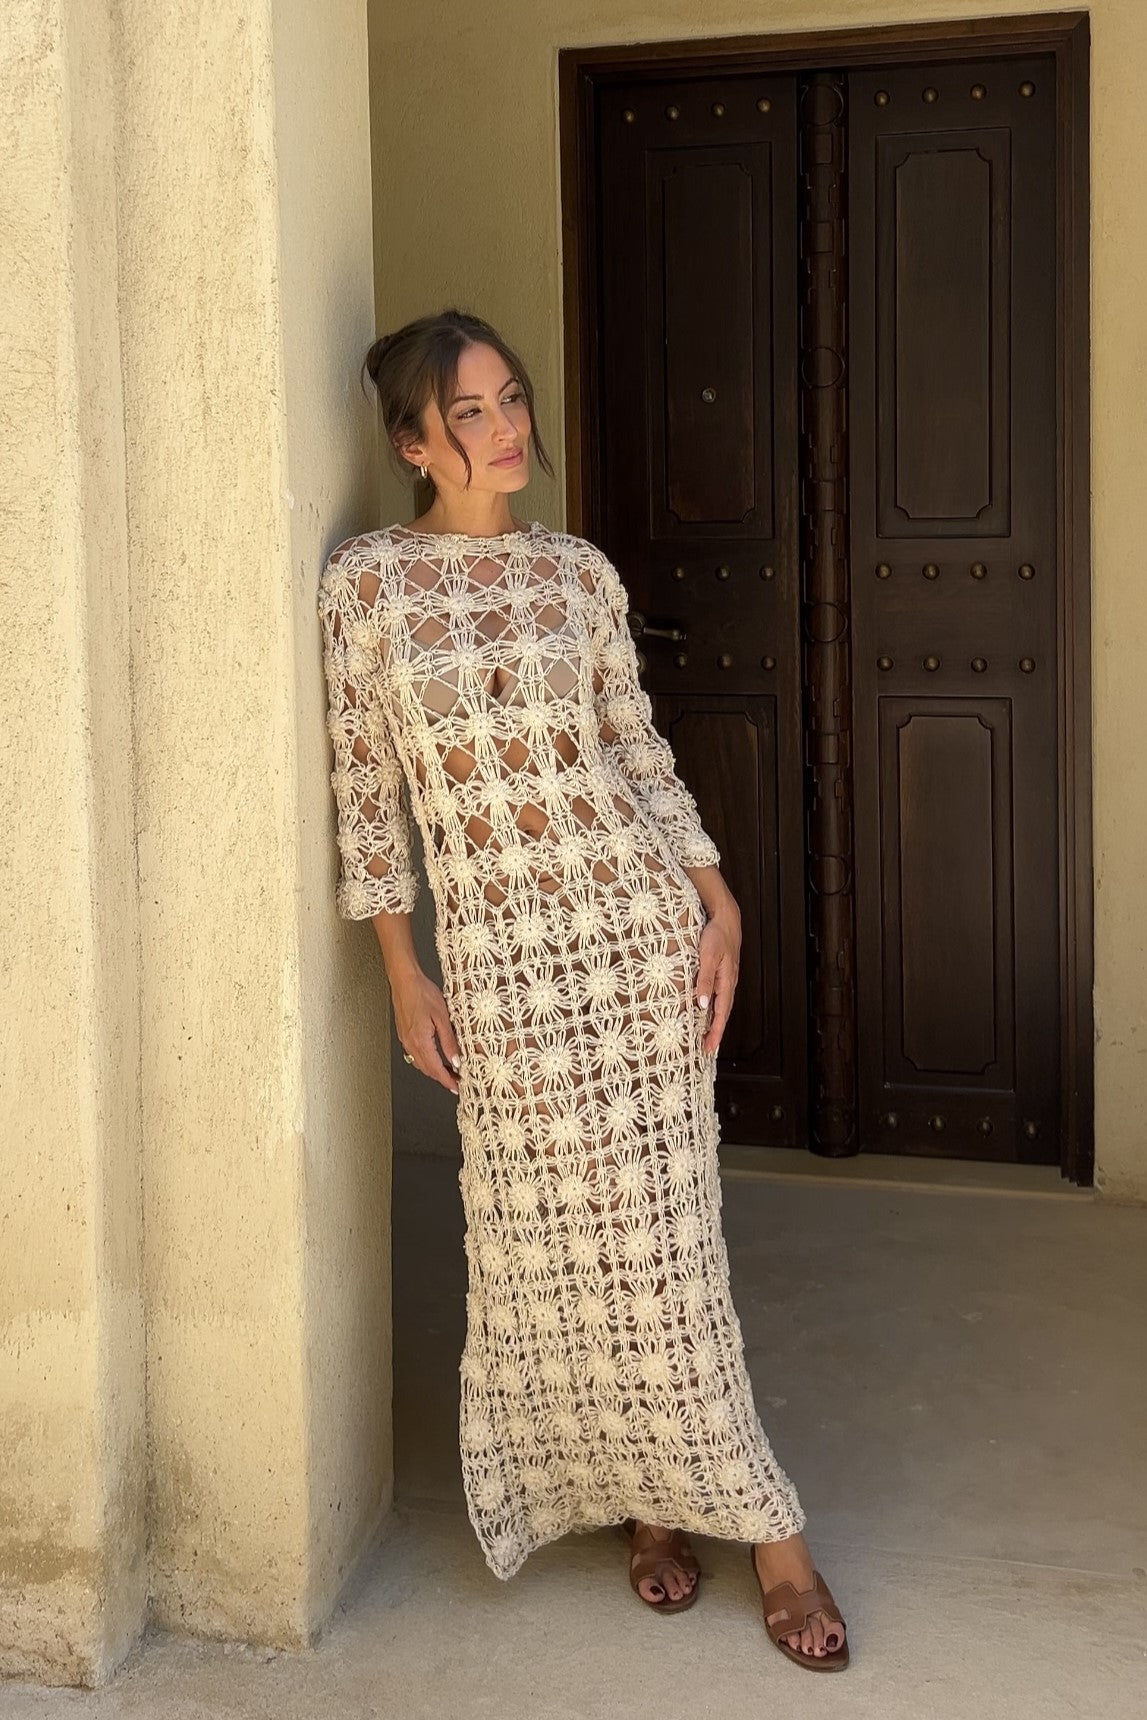 BEIGE HANDMADE LONG DRESS WITH KNITTED FLOWERS